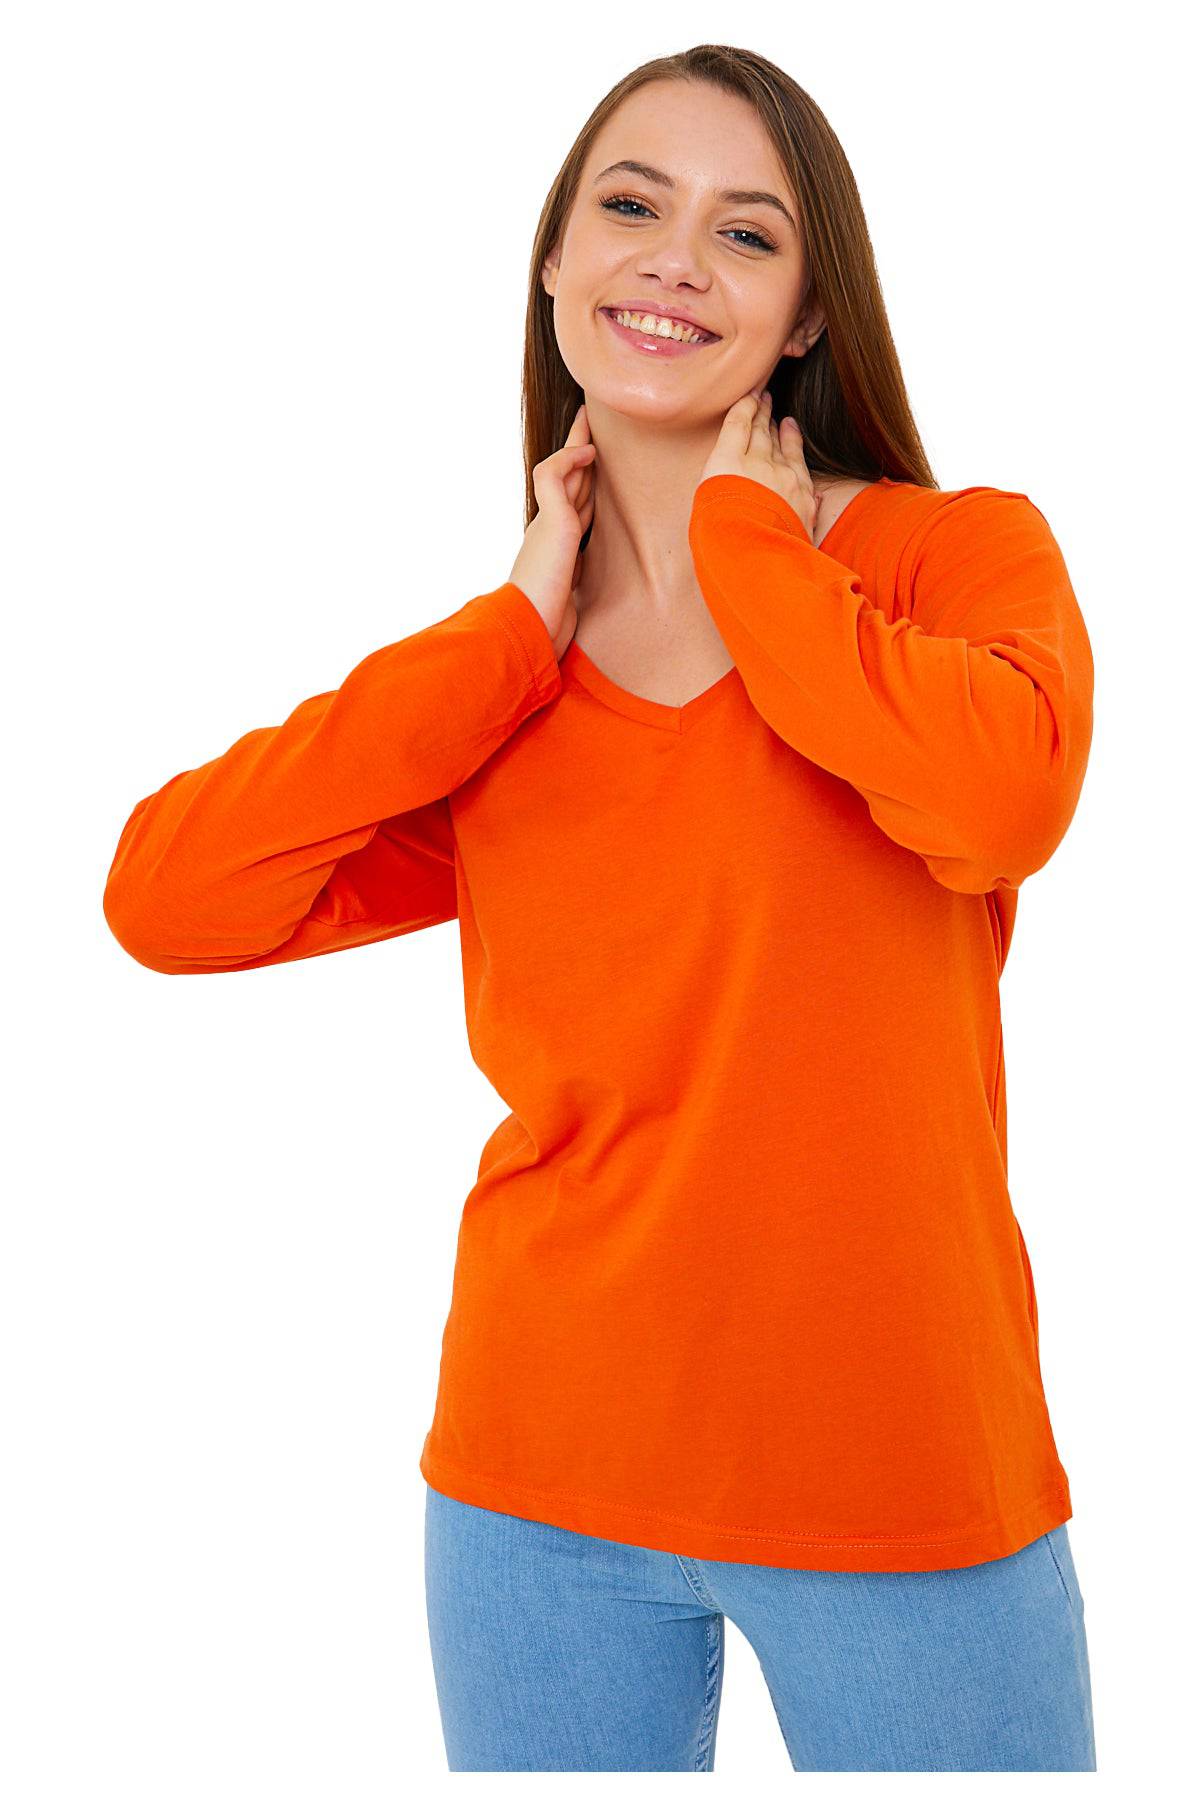 Shirts for Women Womens Long Sleeve T Shirt V Neck Loose Soft Knit Thermal  Top T Shirts for Women Polyester Spandex Cotton Orange Xl 